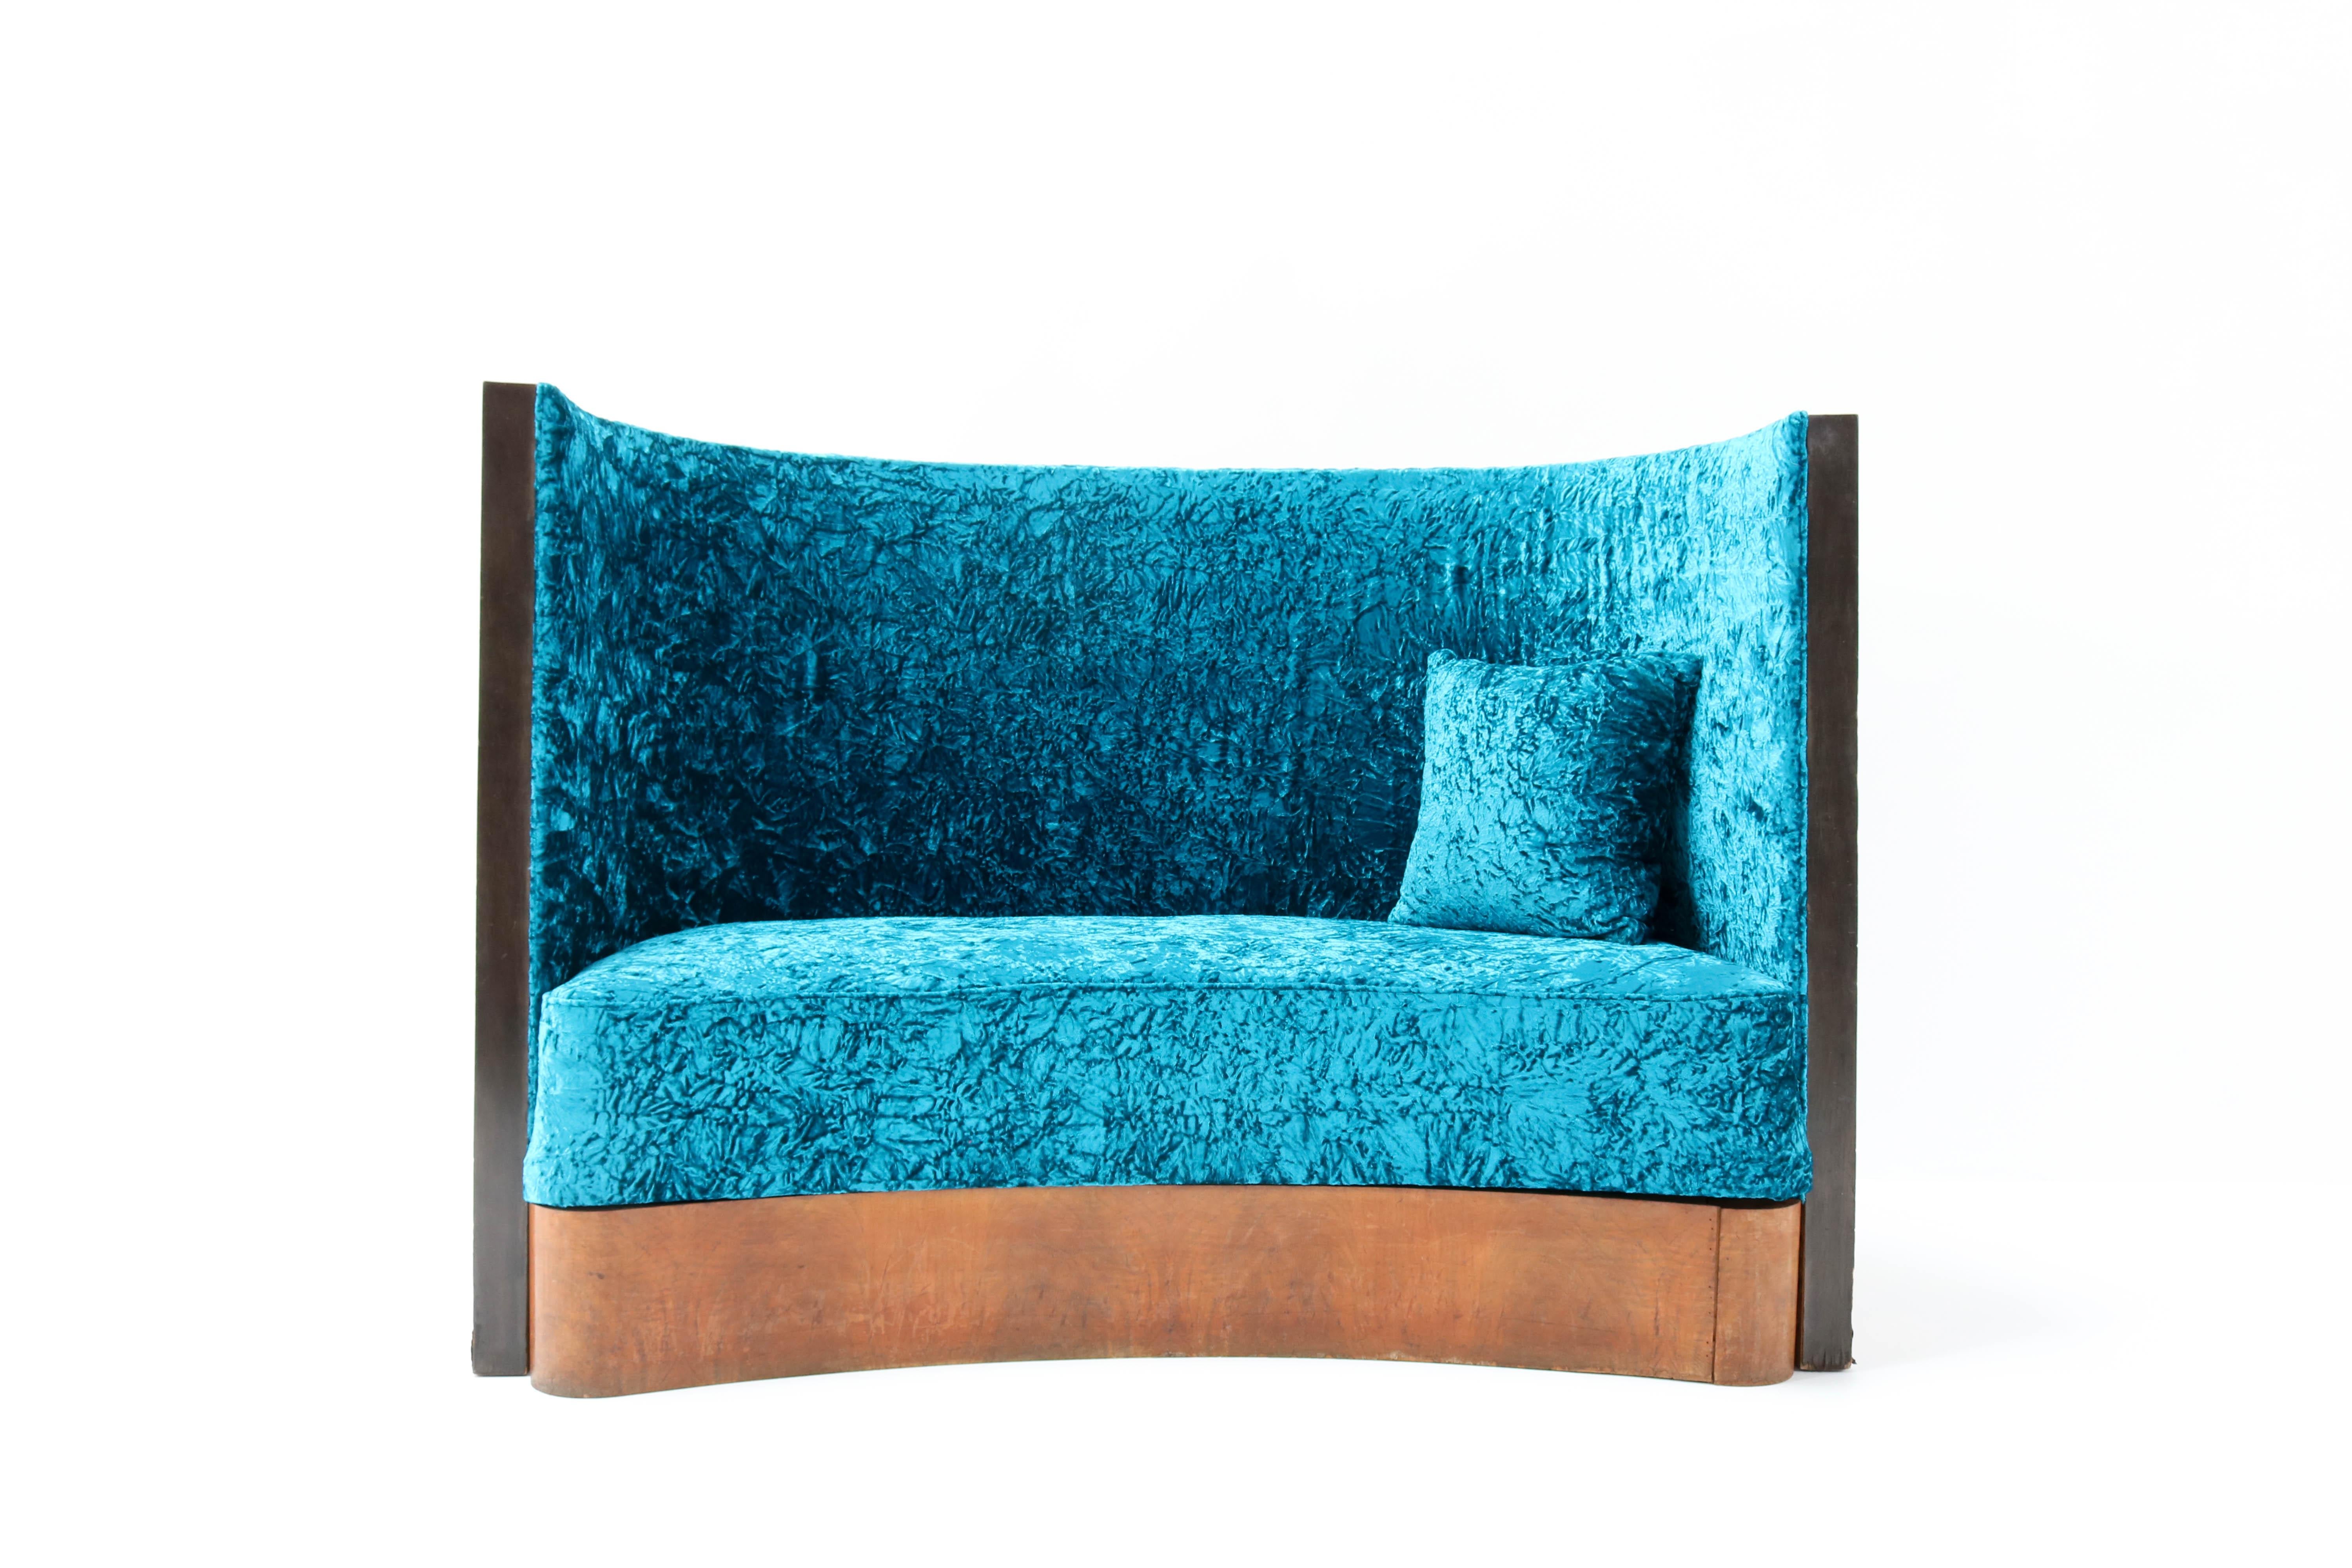 Magnificent and rare Art Deco settee or sofa.
Striking French design from the 1930s.
Walnut veneered frame and re-upholstered with blue velvet fabric.
This wonderful fabric is manufactured in Belgium and the fabric is
wrinkled in Italy.
This